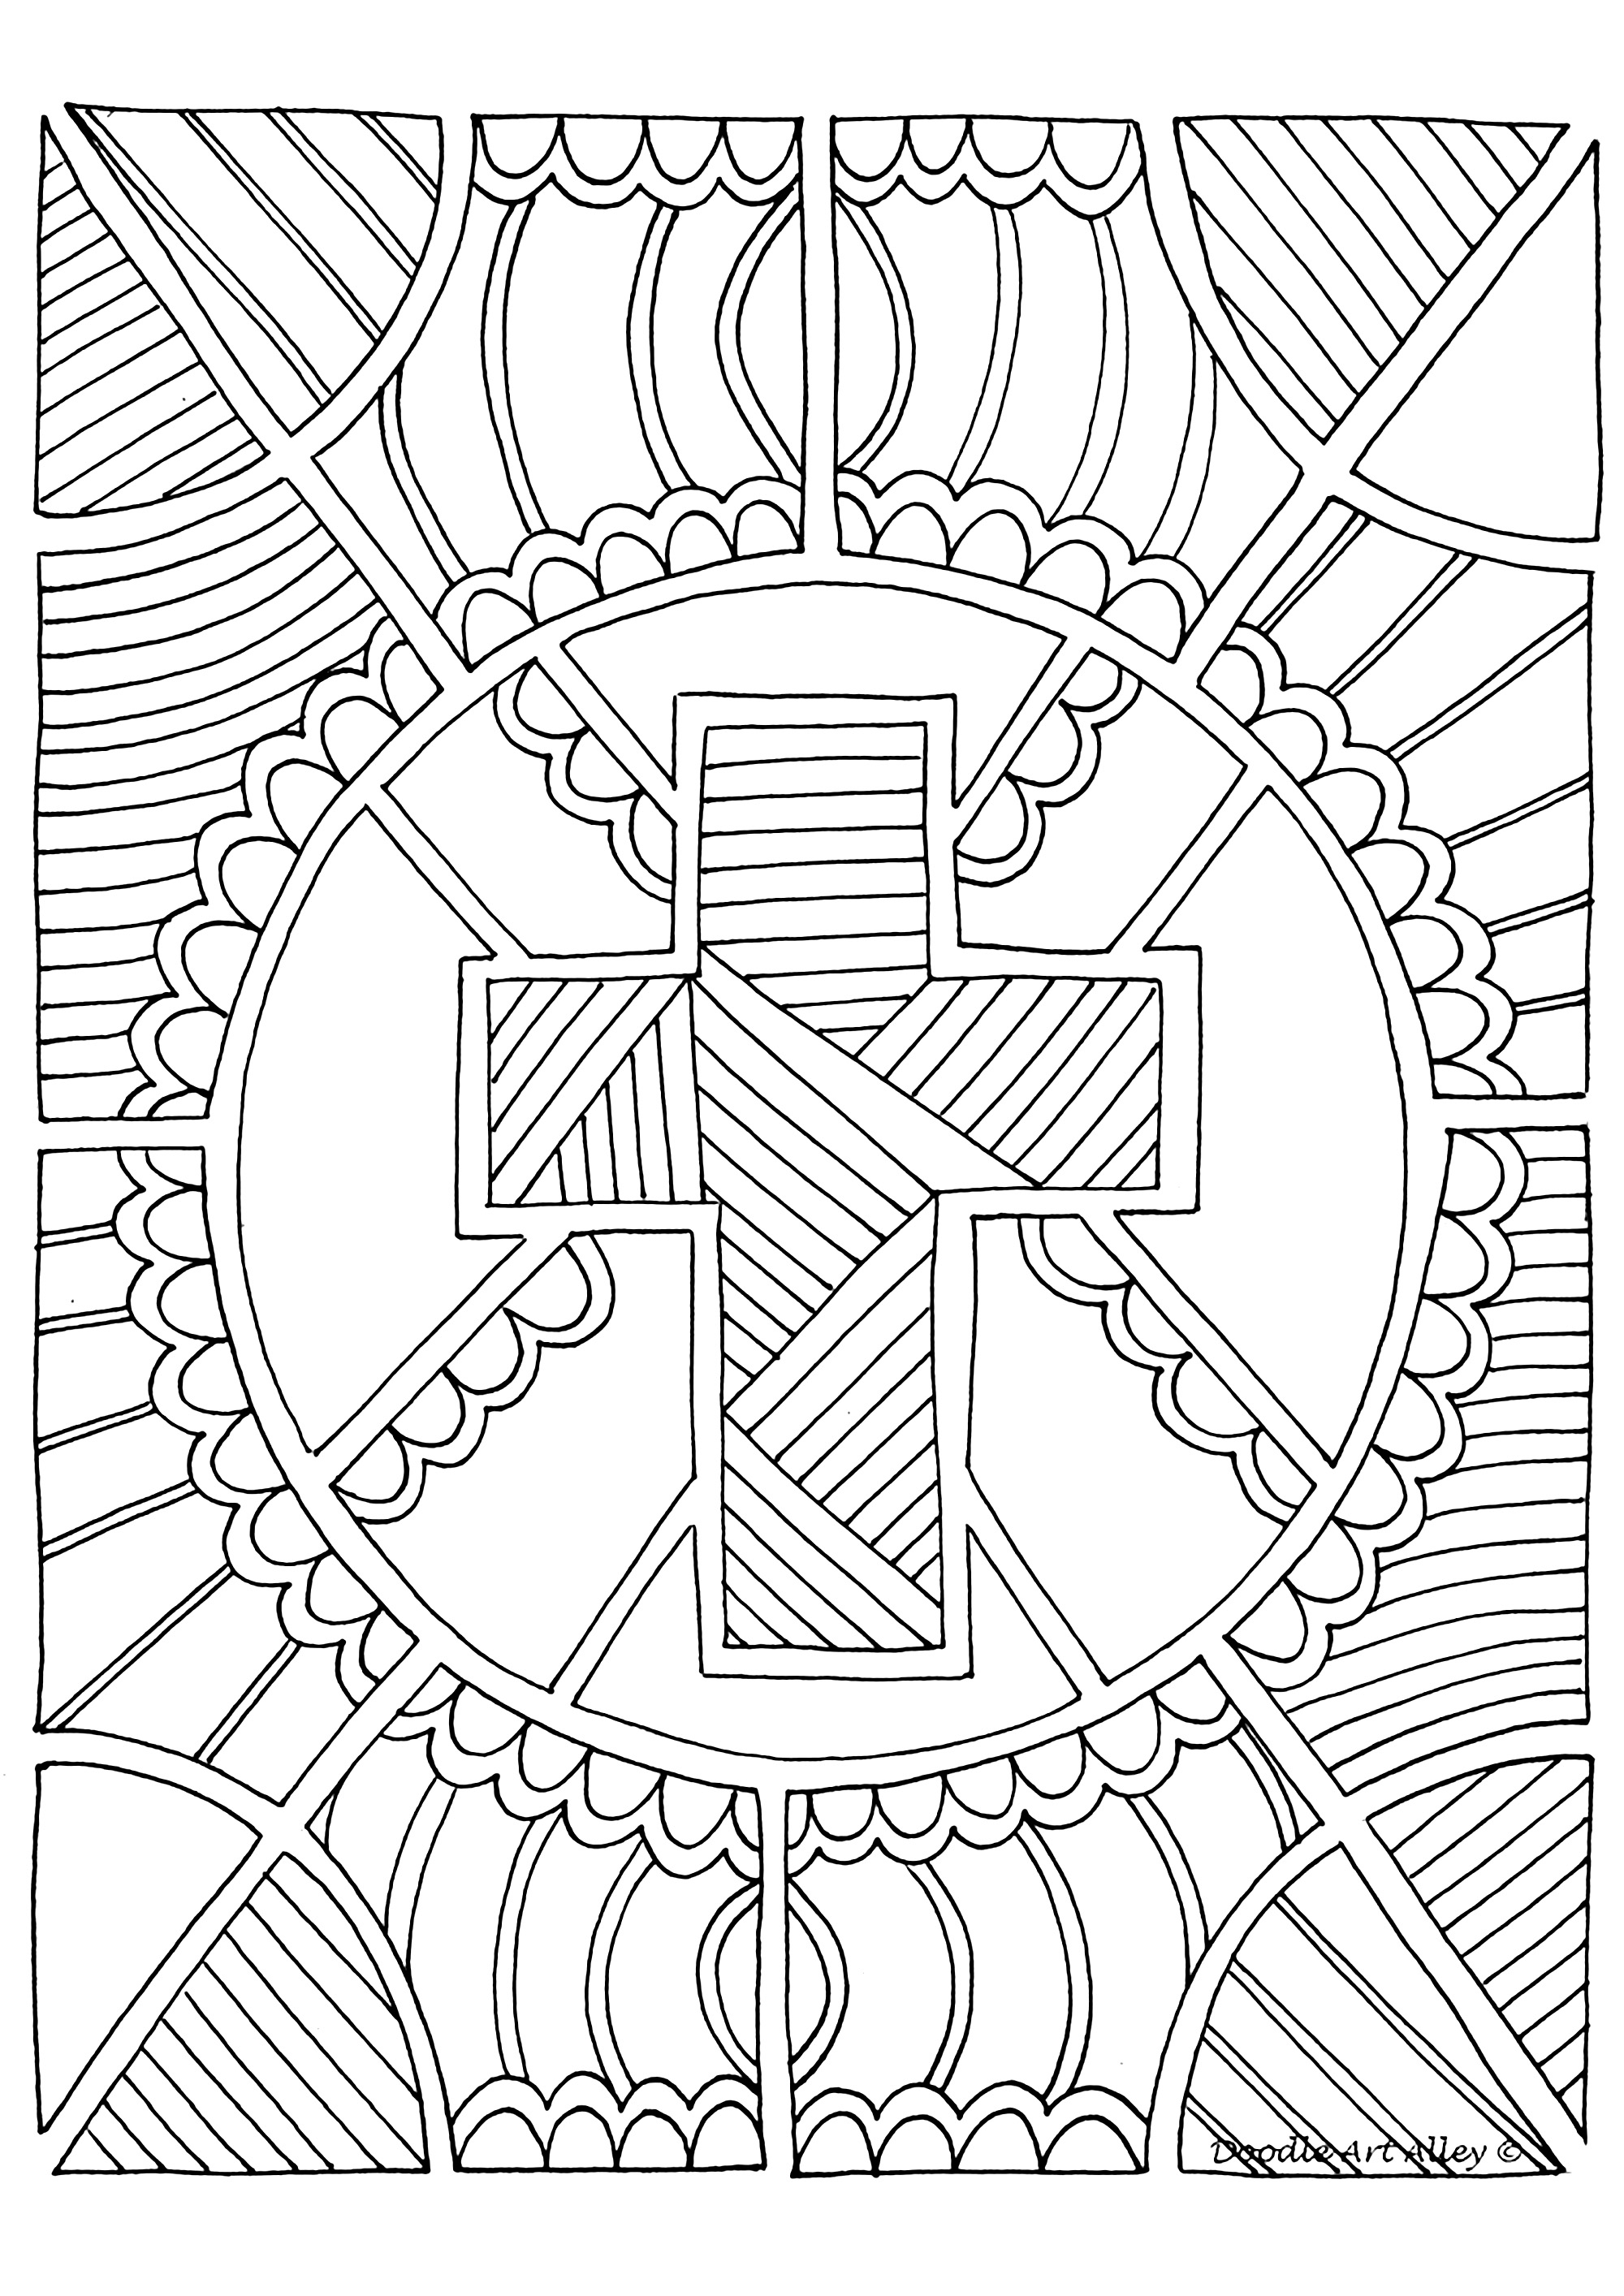 The Cross, symbol of Christianity. A design with many patterns to color